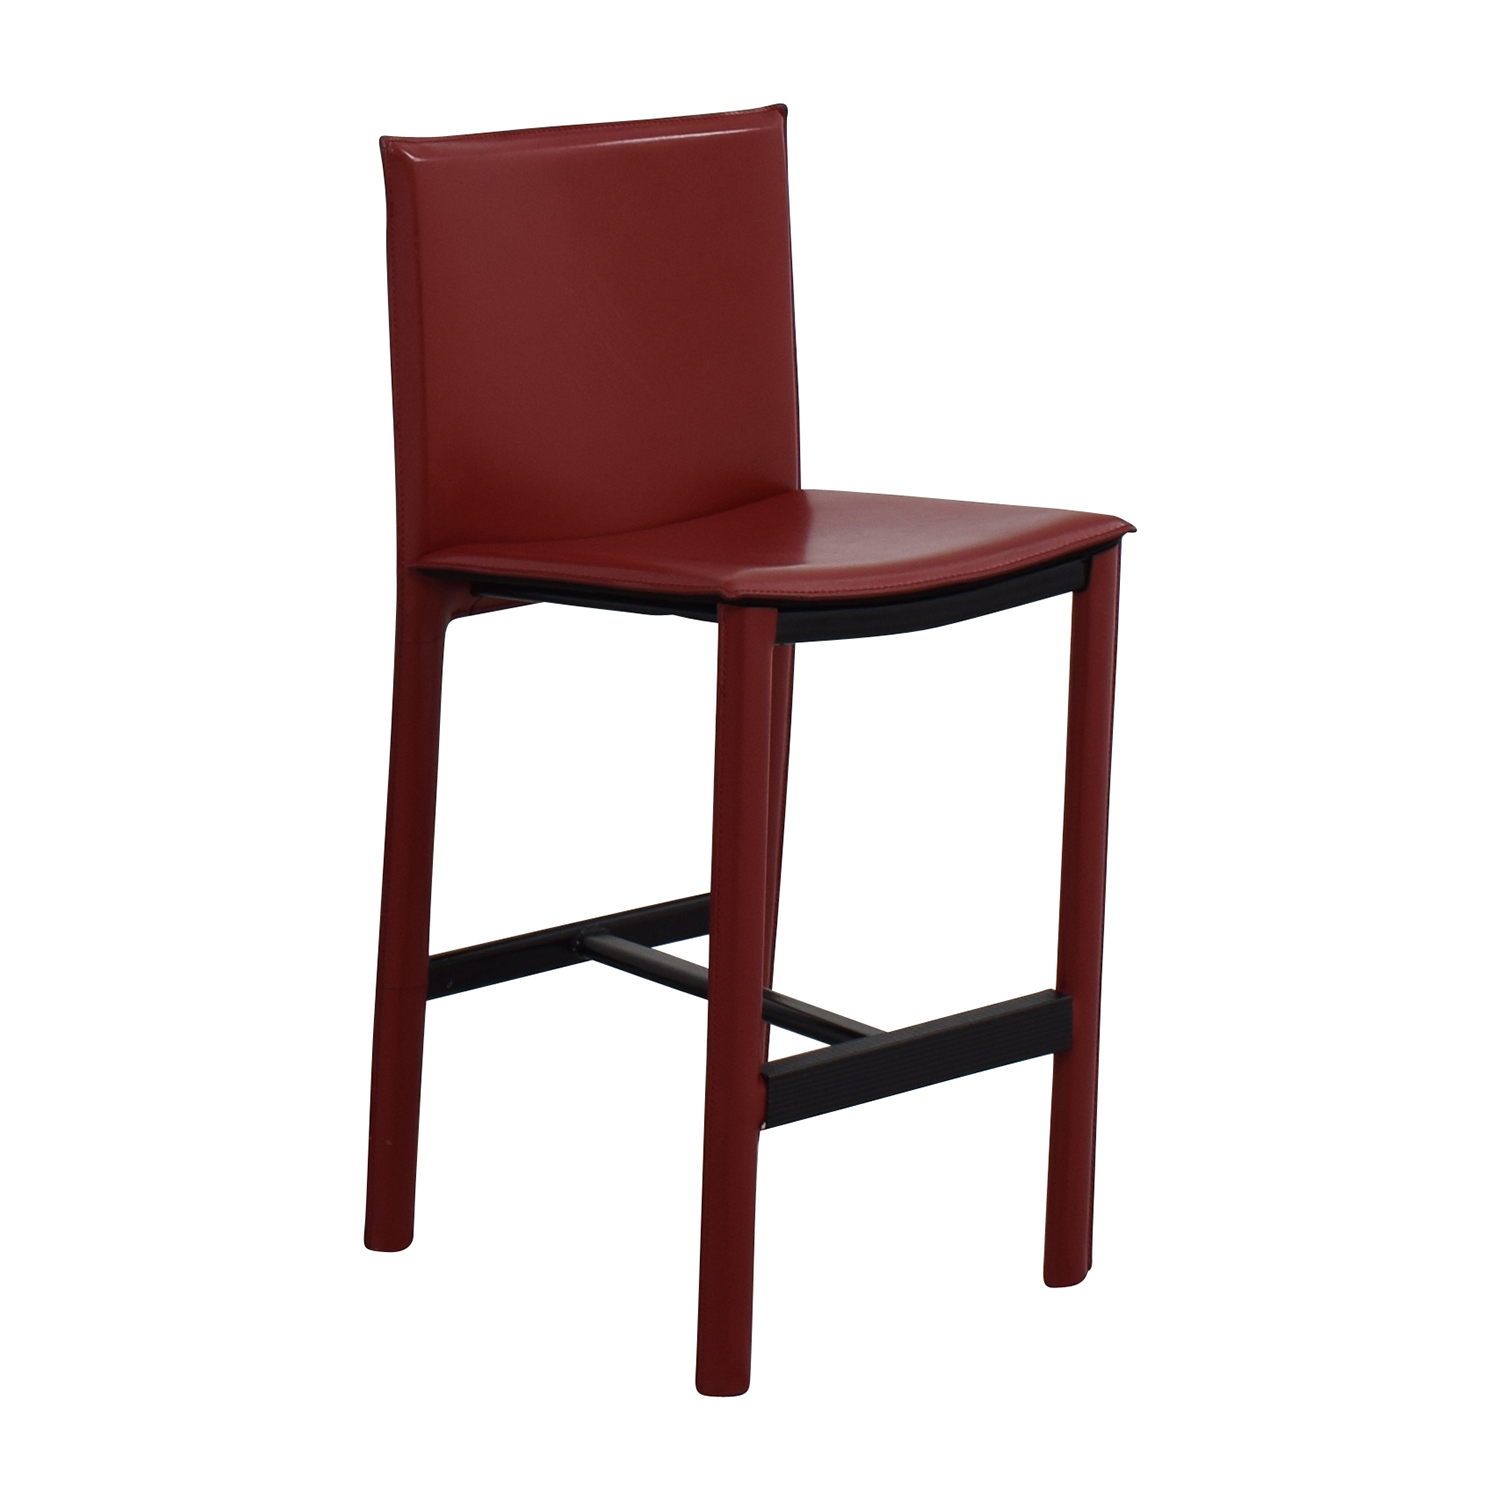 Red Leather High Chair ($10)